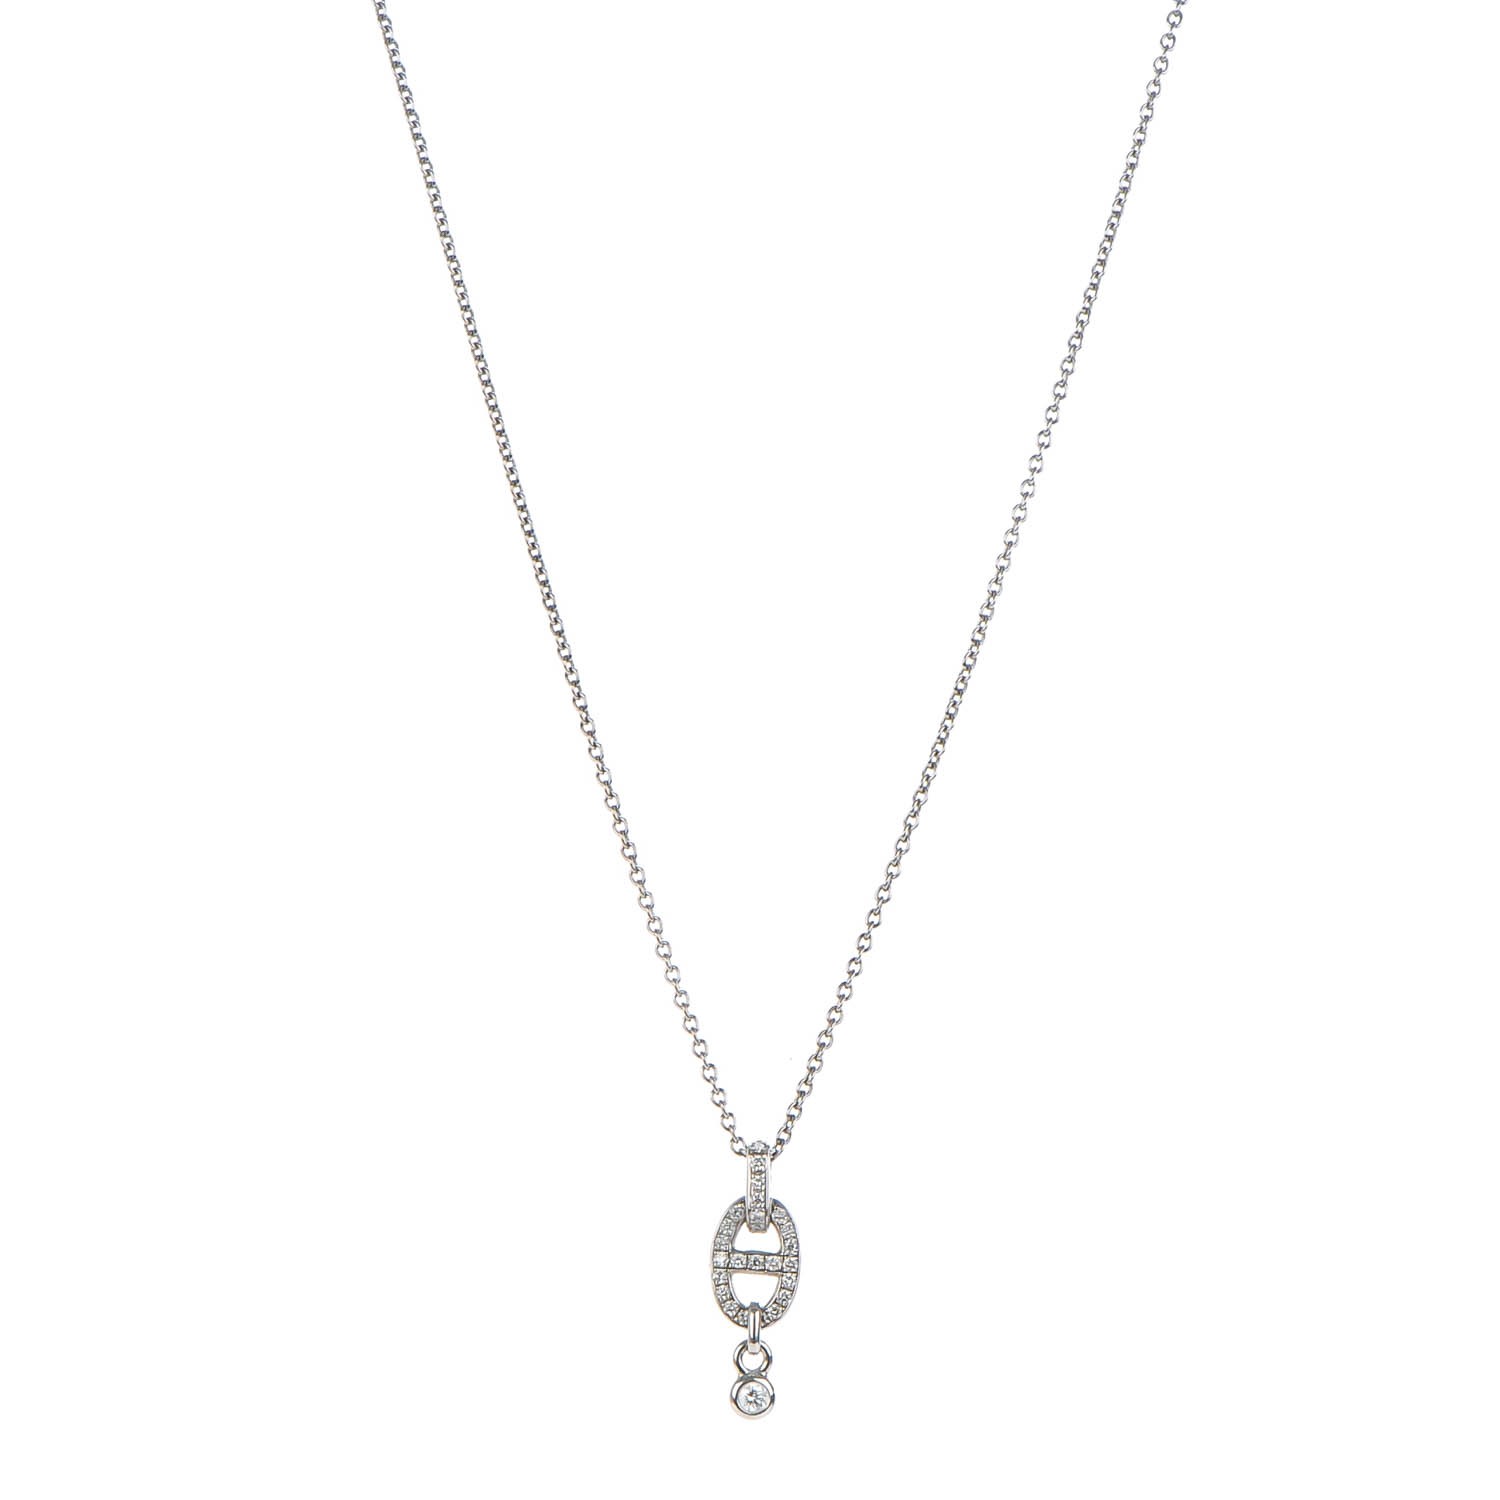 HERMES 18K White Gold Diamond PM Chaine d'Ancre Enchainee Necklace ...